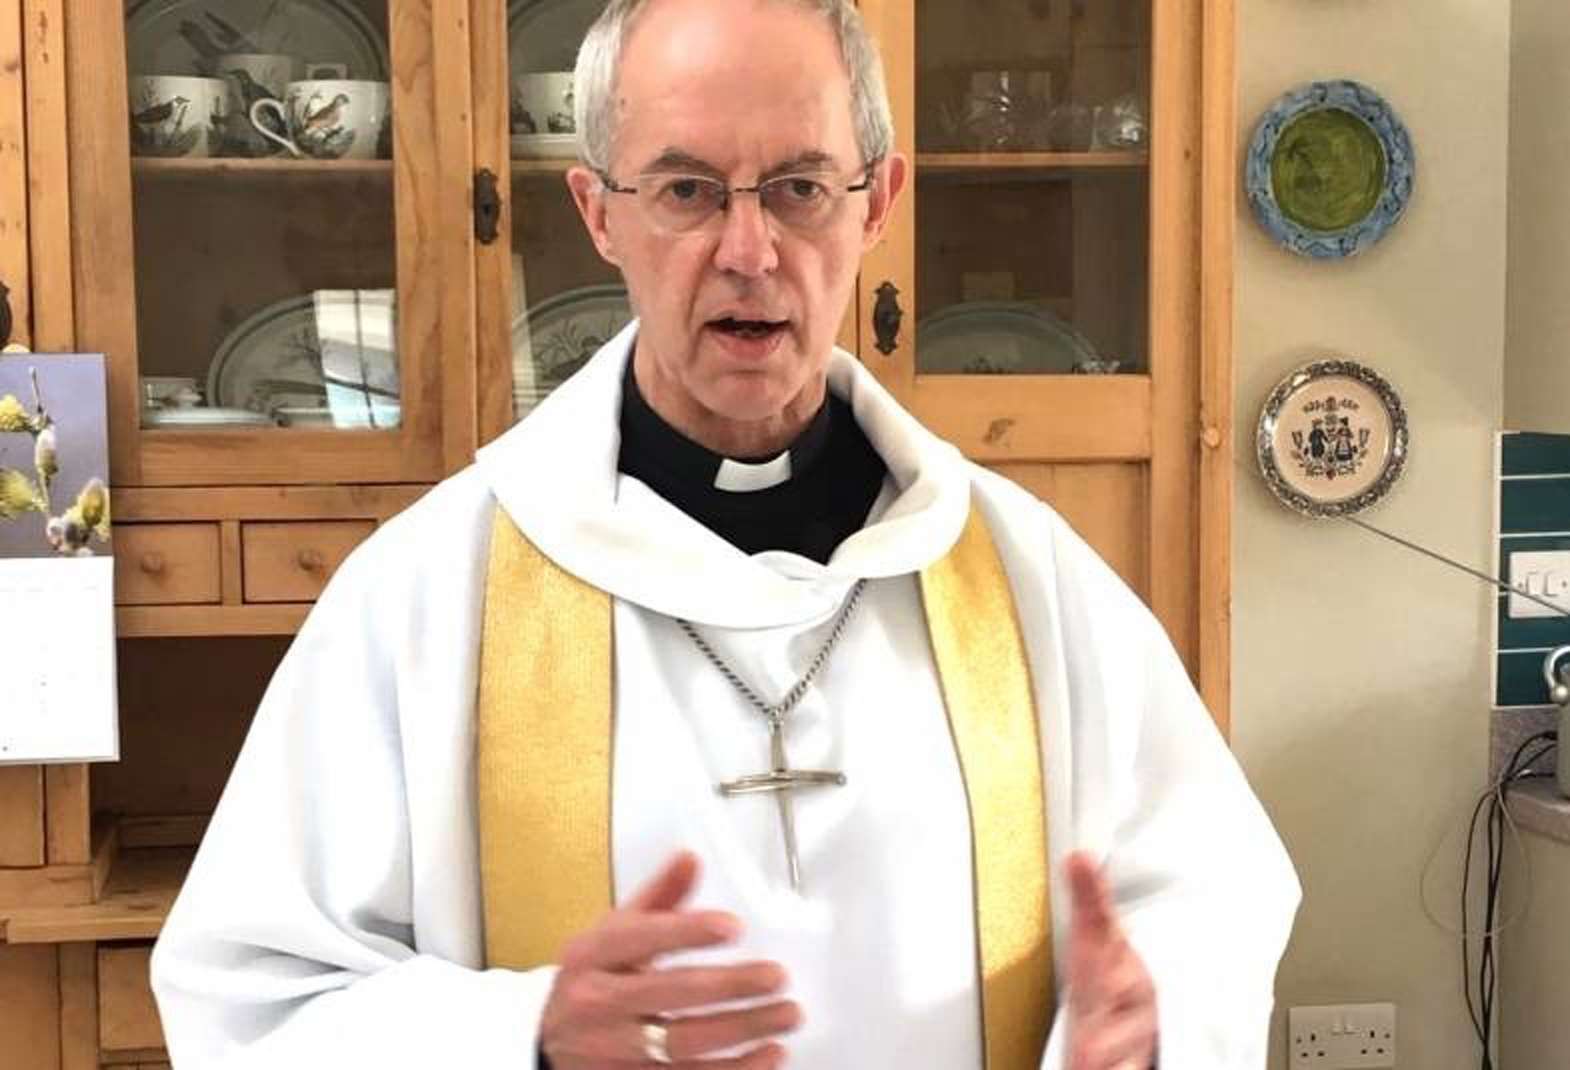 The Archbishop of Canterbury will deliver his Easter sermon in a video recorded in his flat at Lambeth Palace (Caroline Welby/PA)